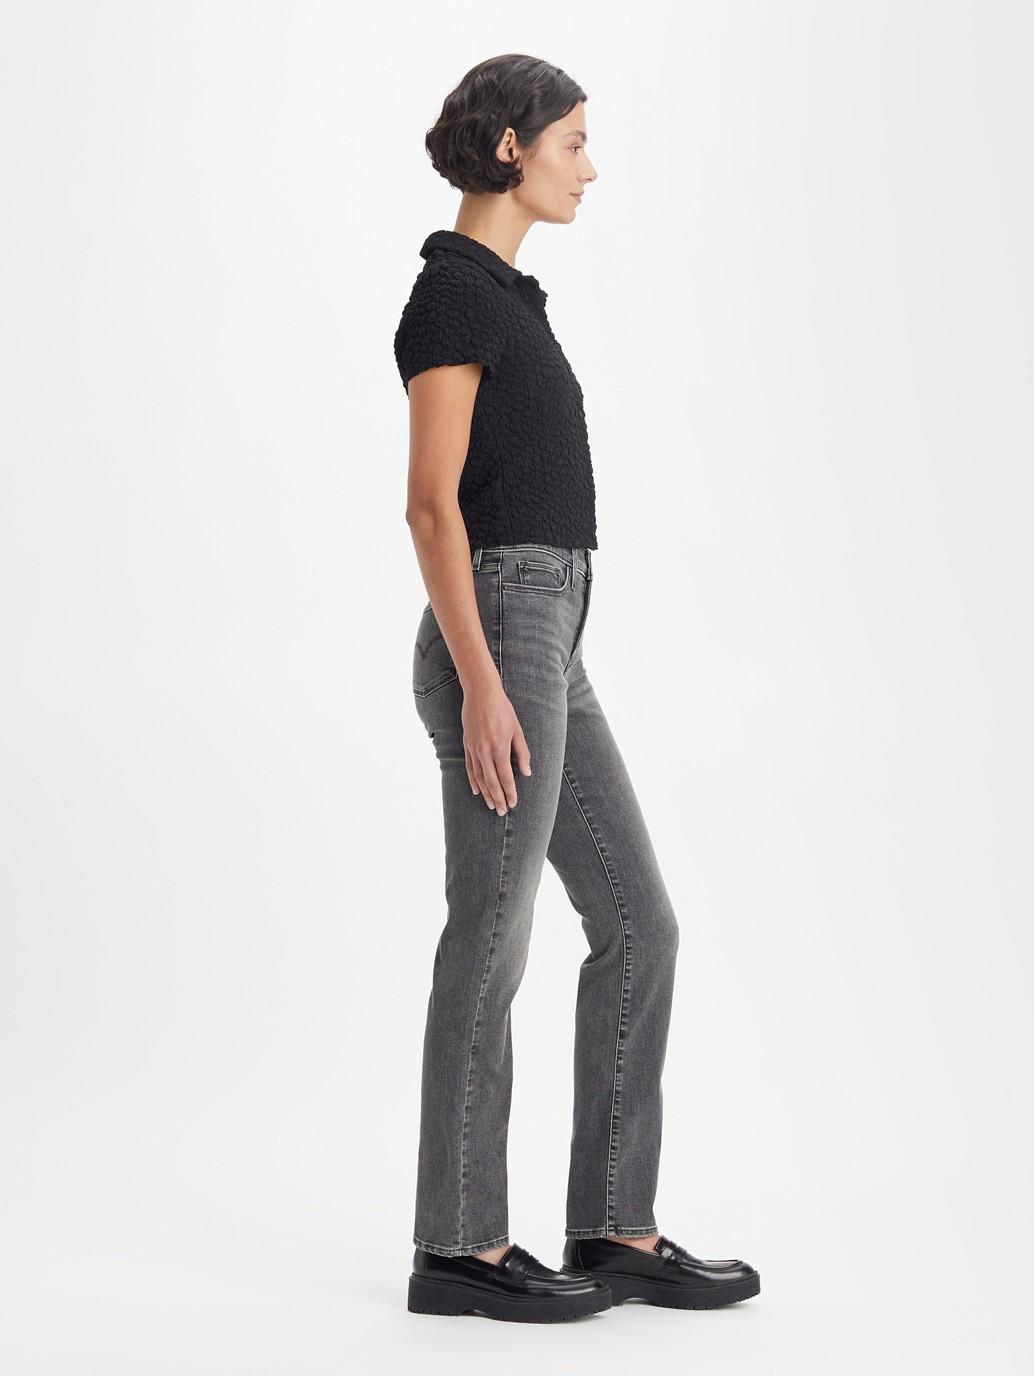 Buy Levi's® Women's 314 Shaping Straight Jeans| Levi's Official Online ...